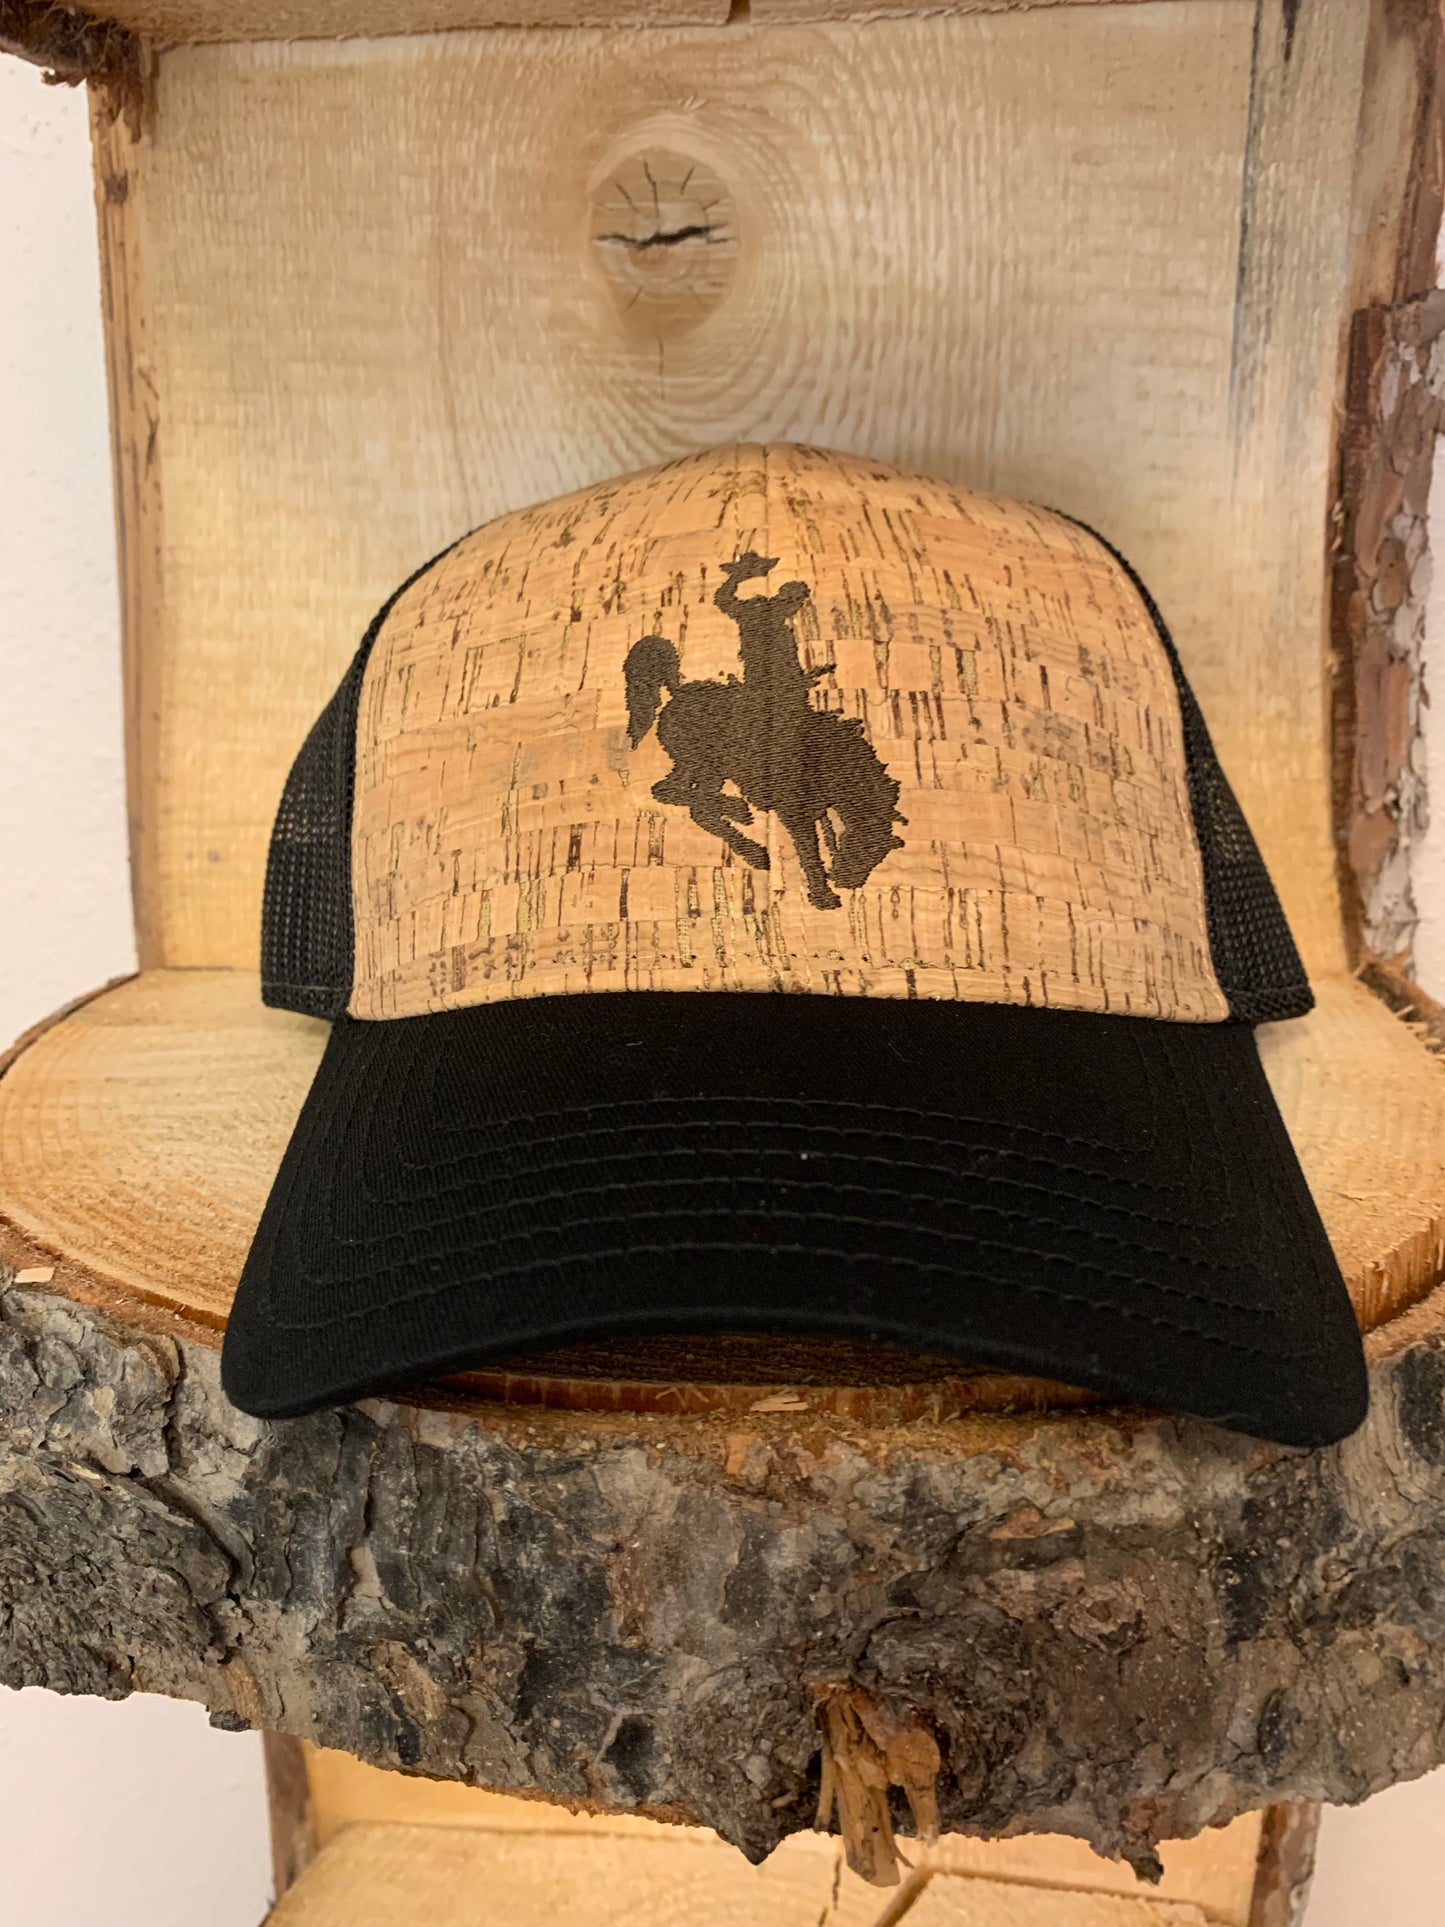 Wyoming Bucking Horse Embroidered Snapback Trucker Hat